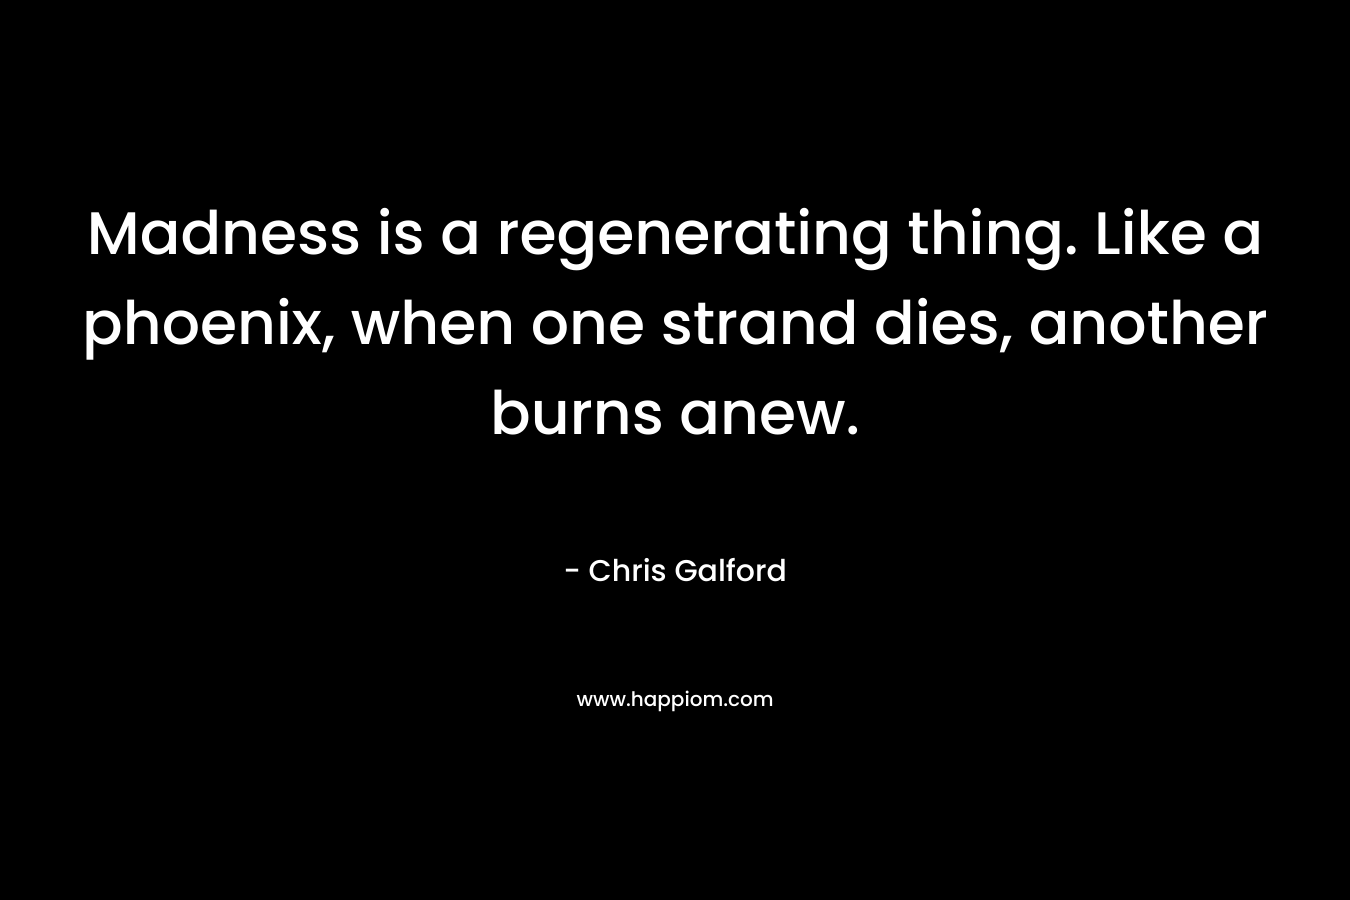 Madness is a regenerating thing. Like a phoenix, when one strand dies, another burns anew. – Chris Galford